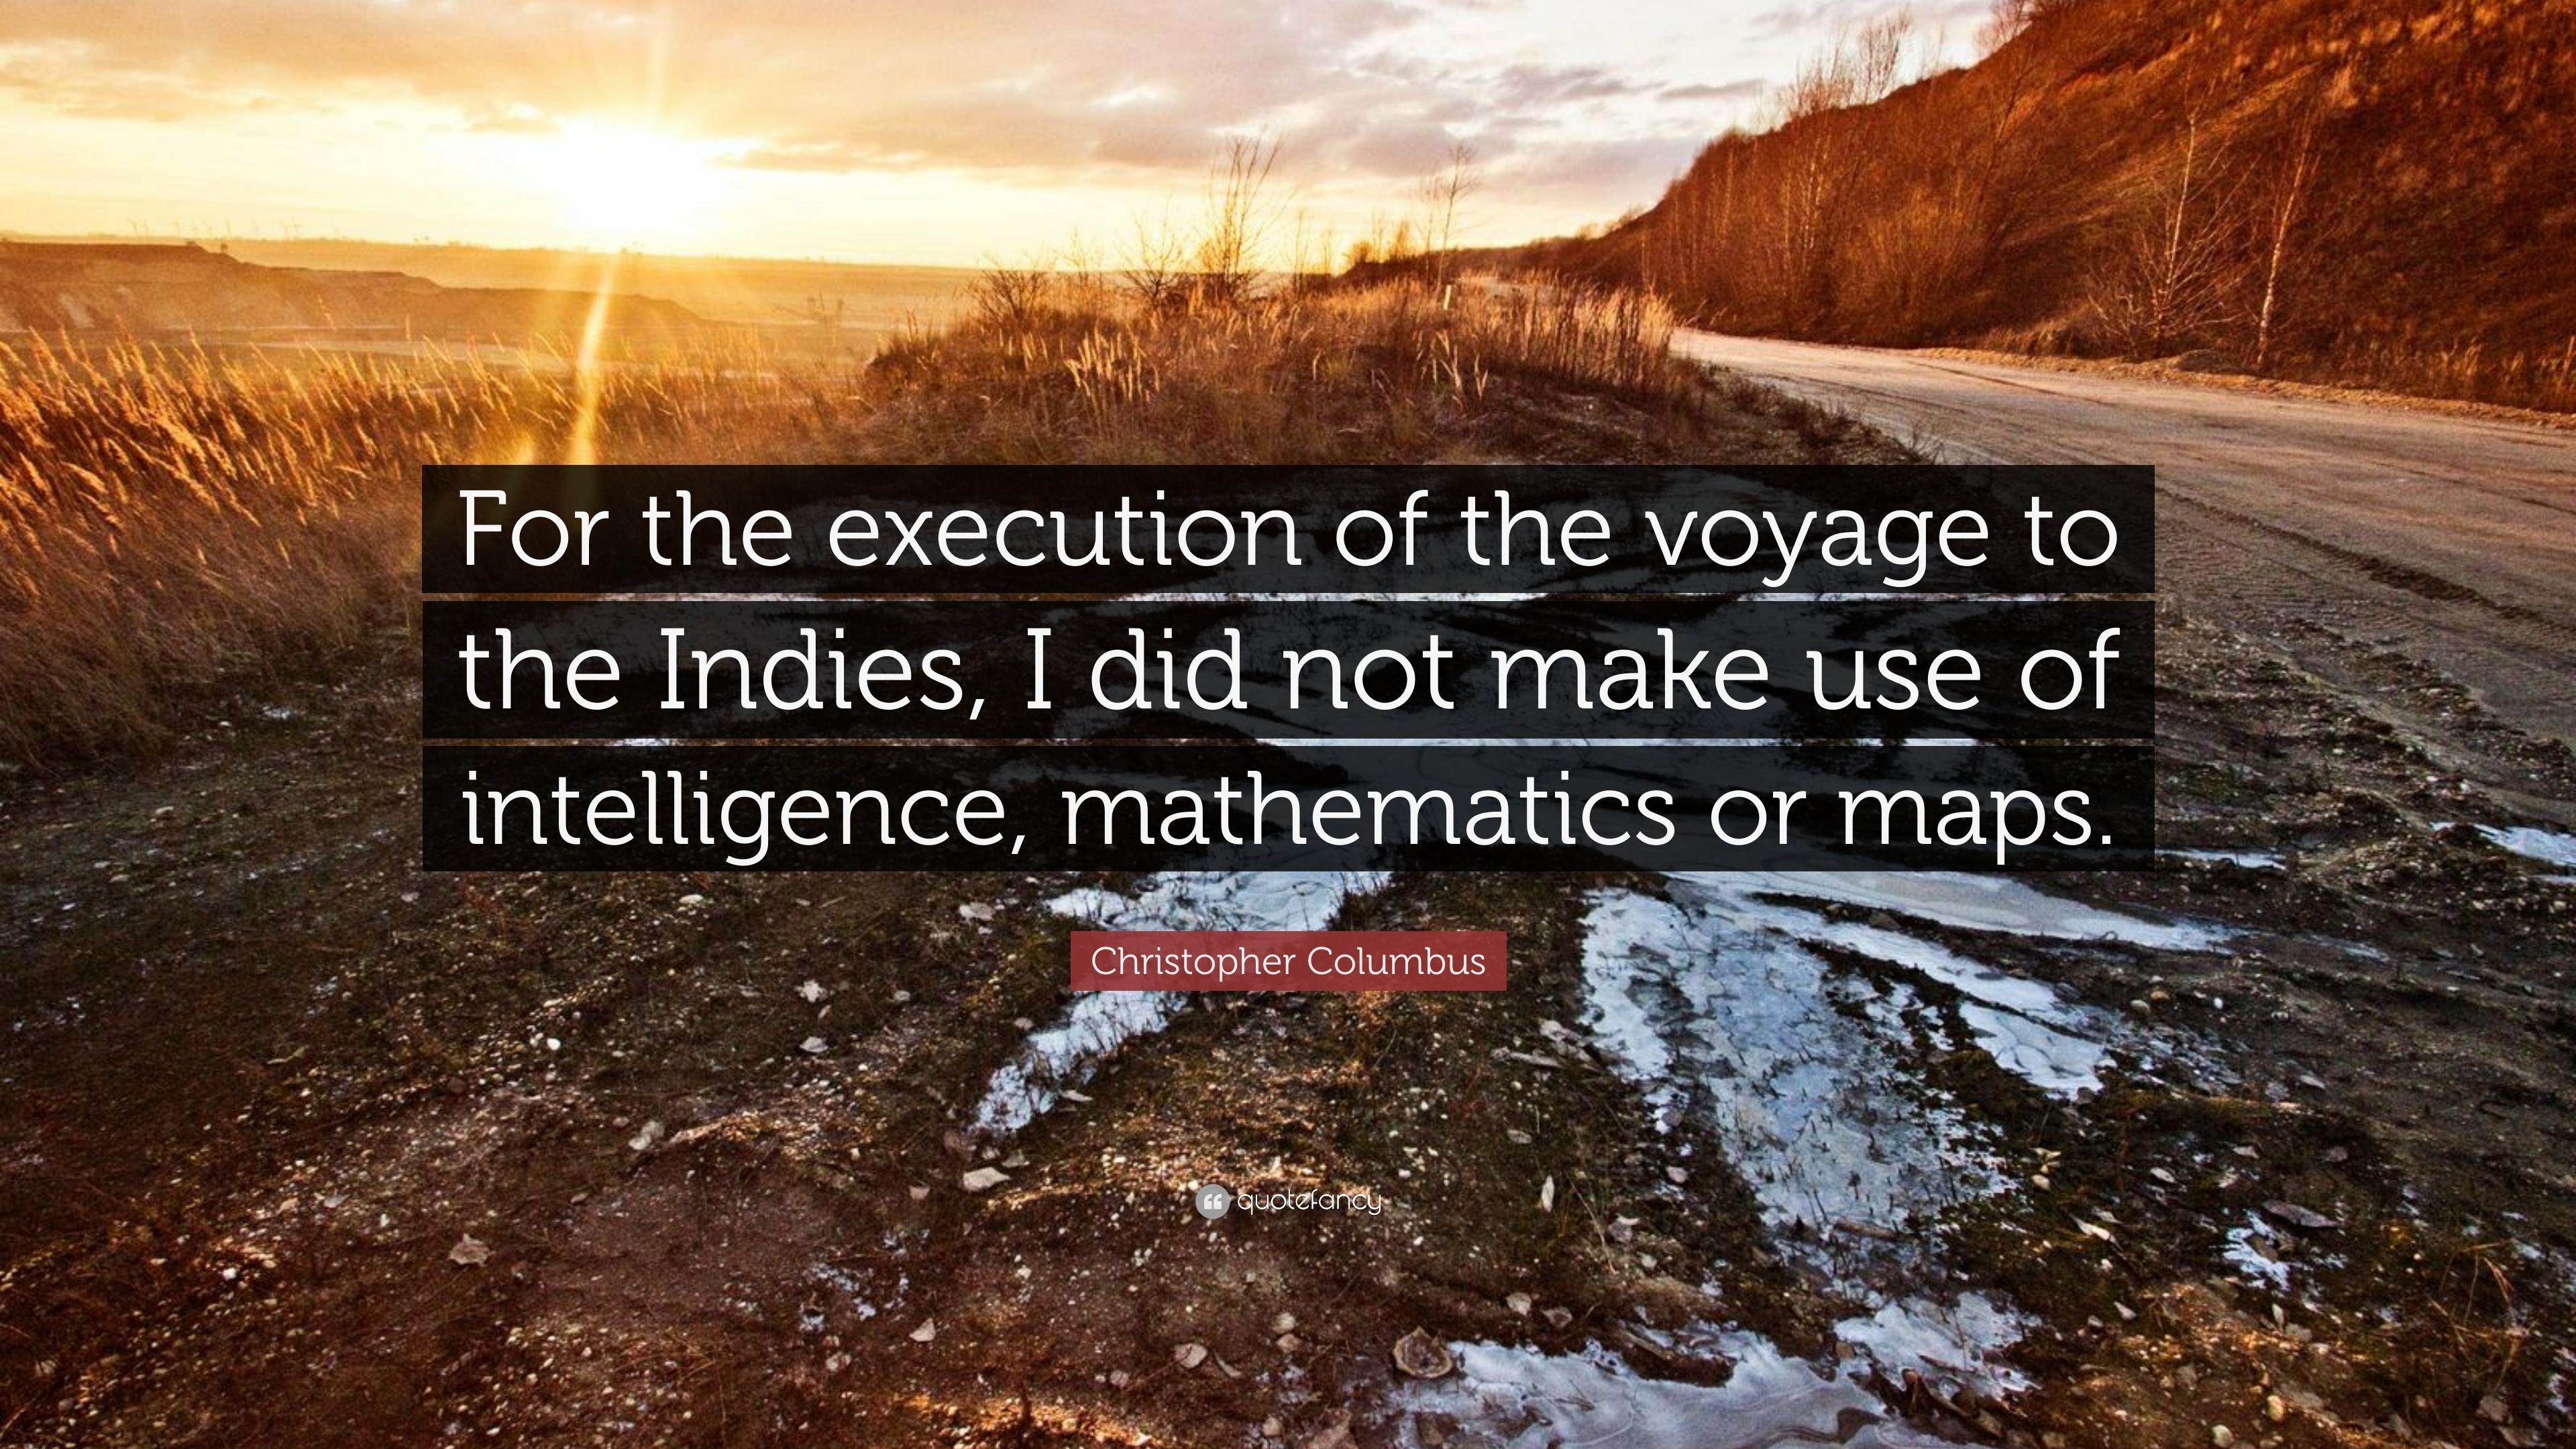 Christopher Columbus Quote: “For the execution of the voyage to